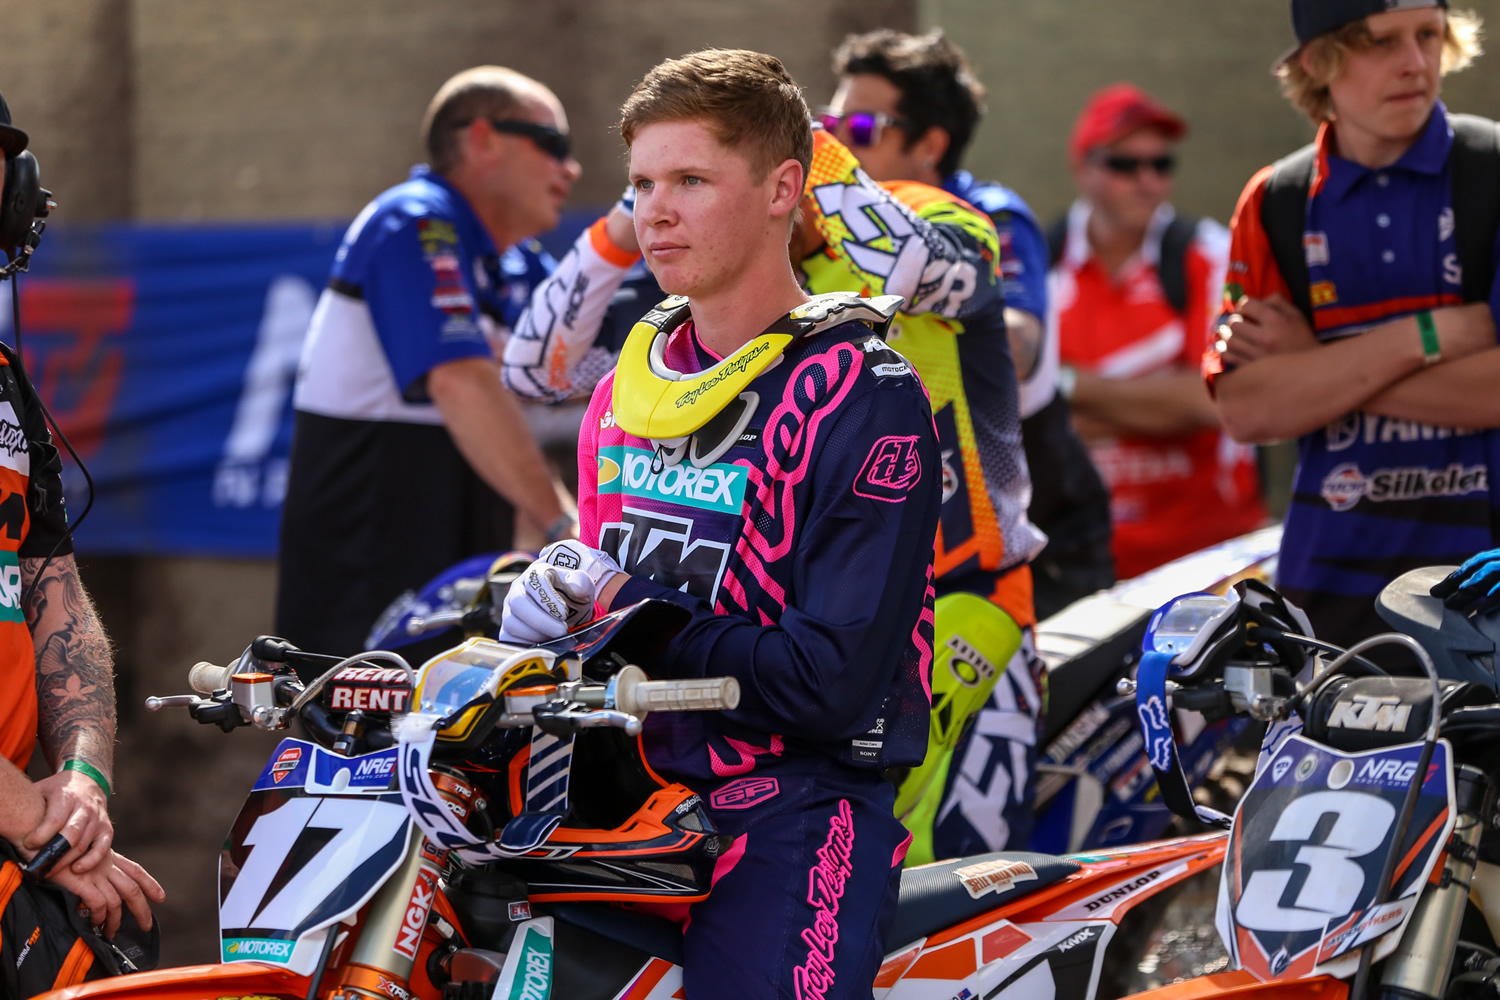 MXGP debut well deserved for this guy